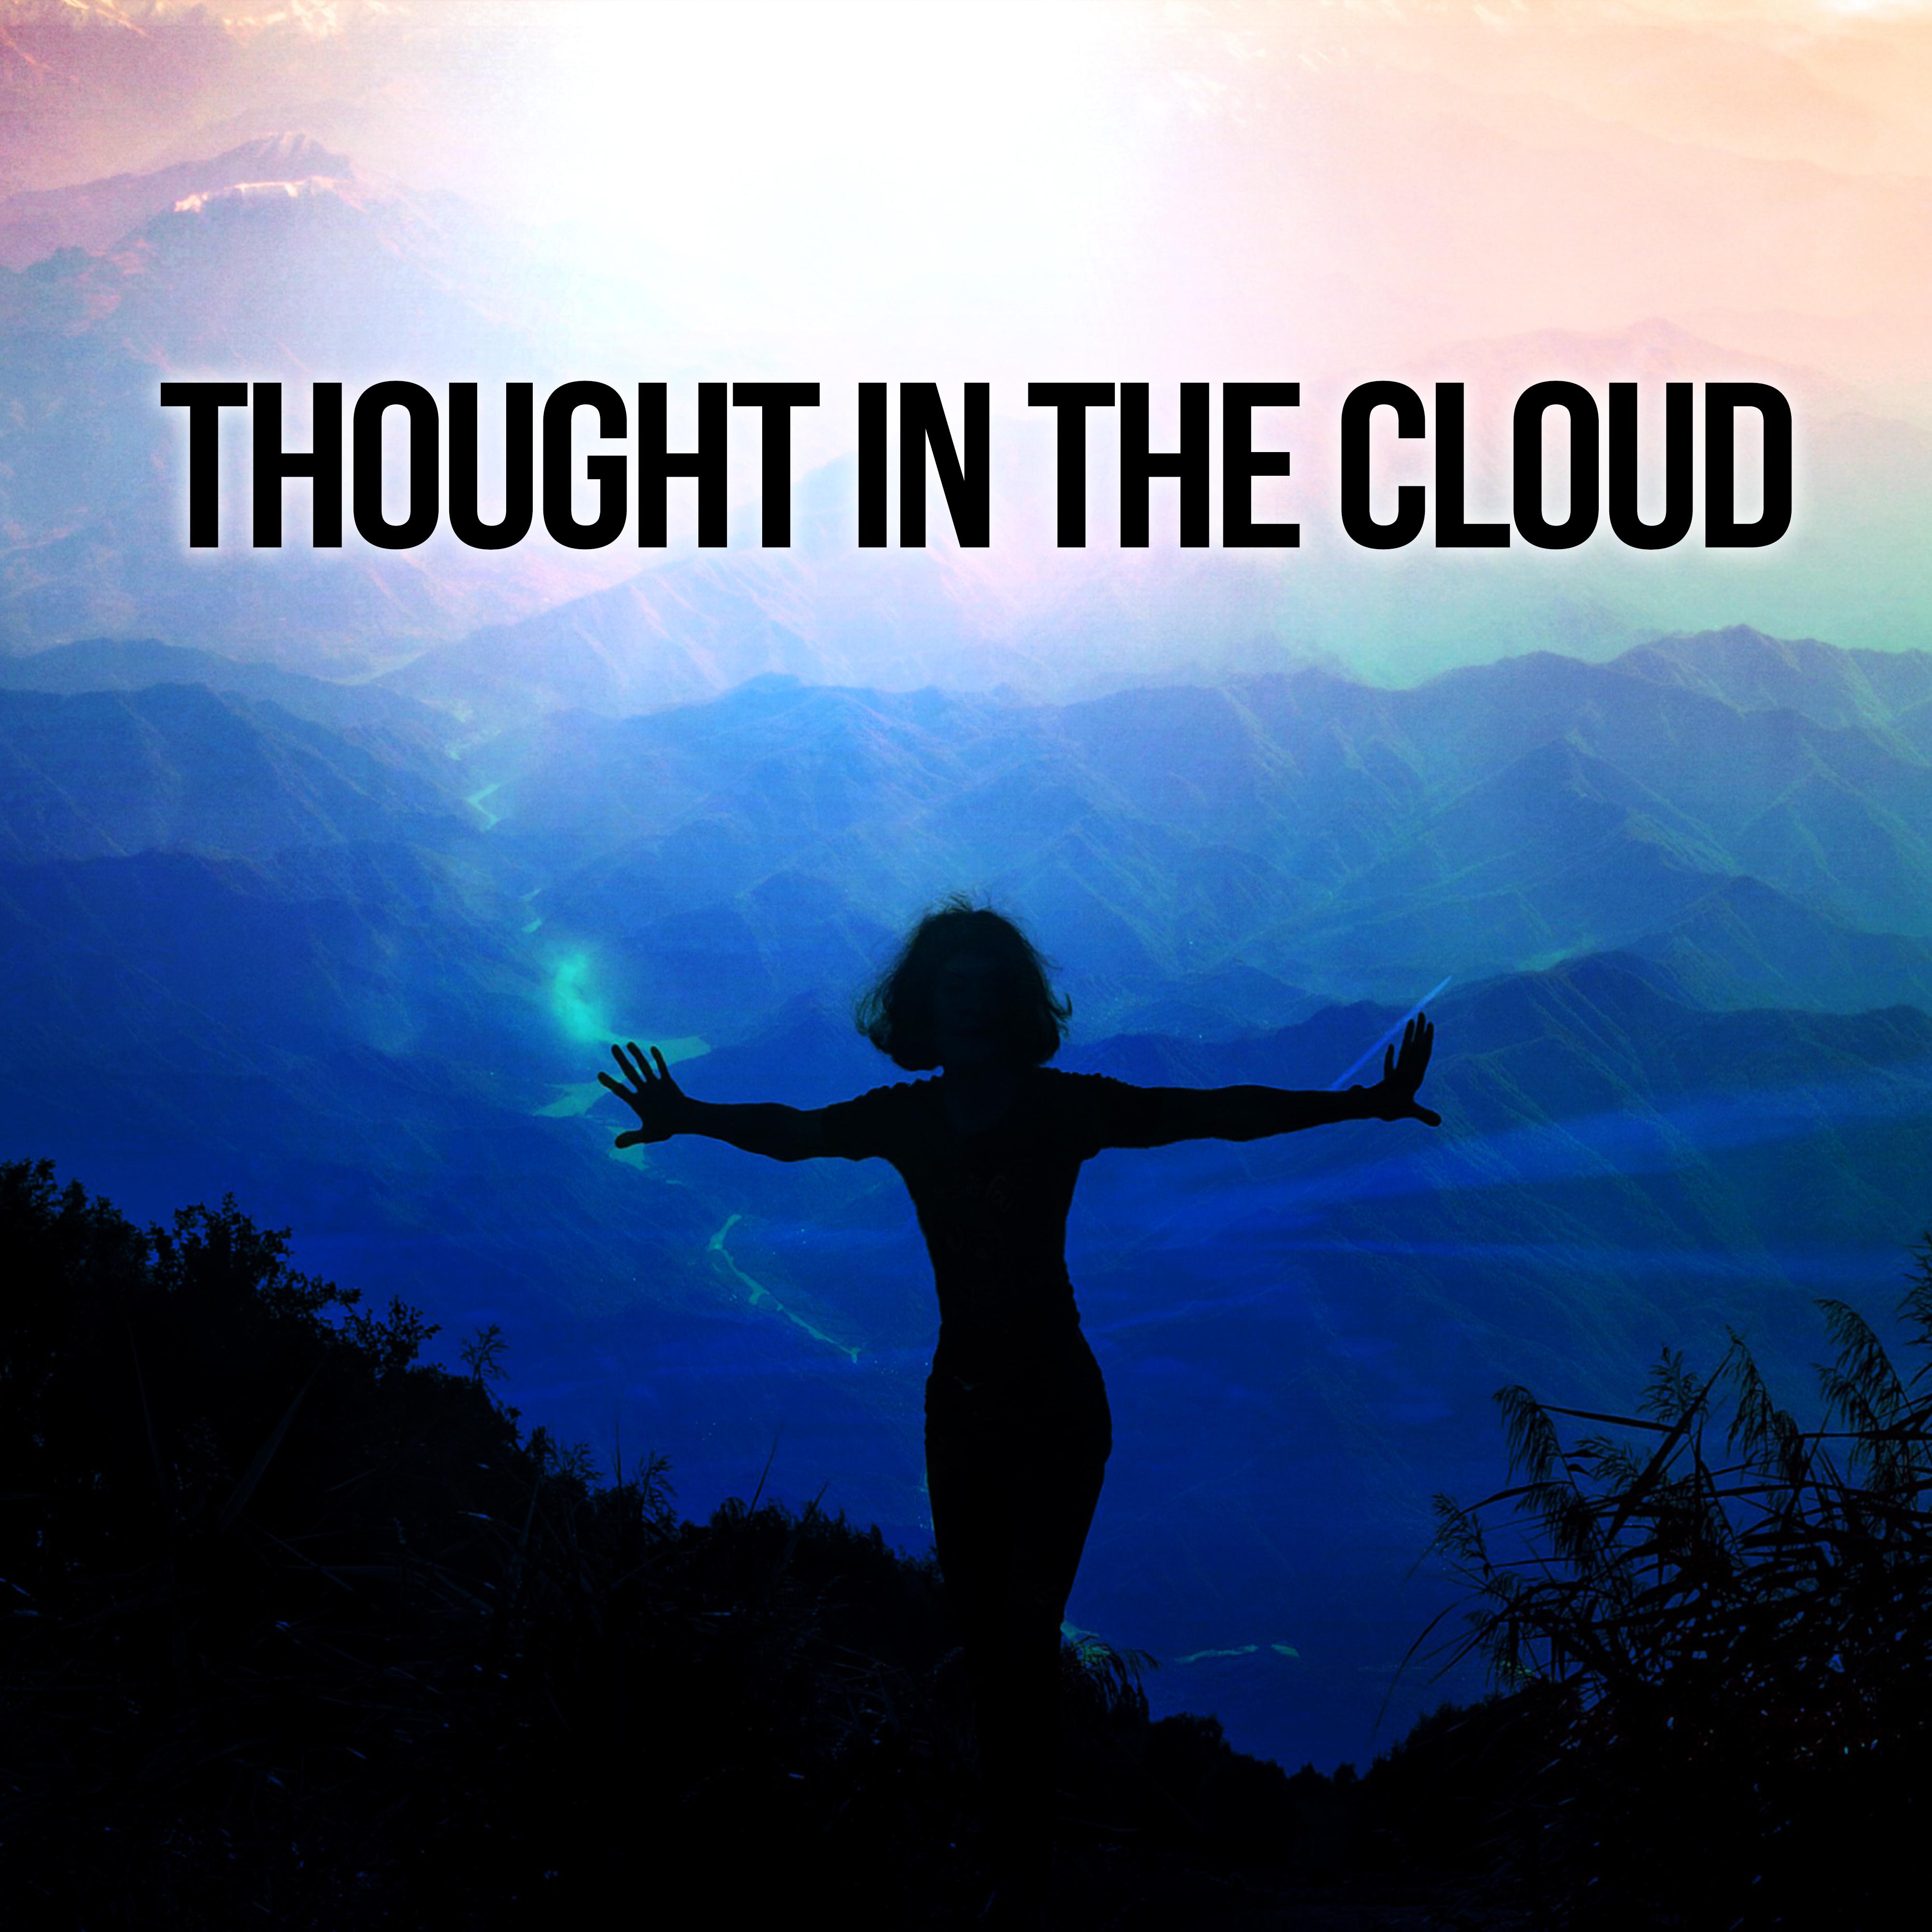 Thought in the Cloud  Thinking, Reflection, Meditation about Life